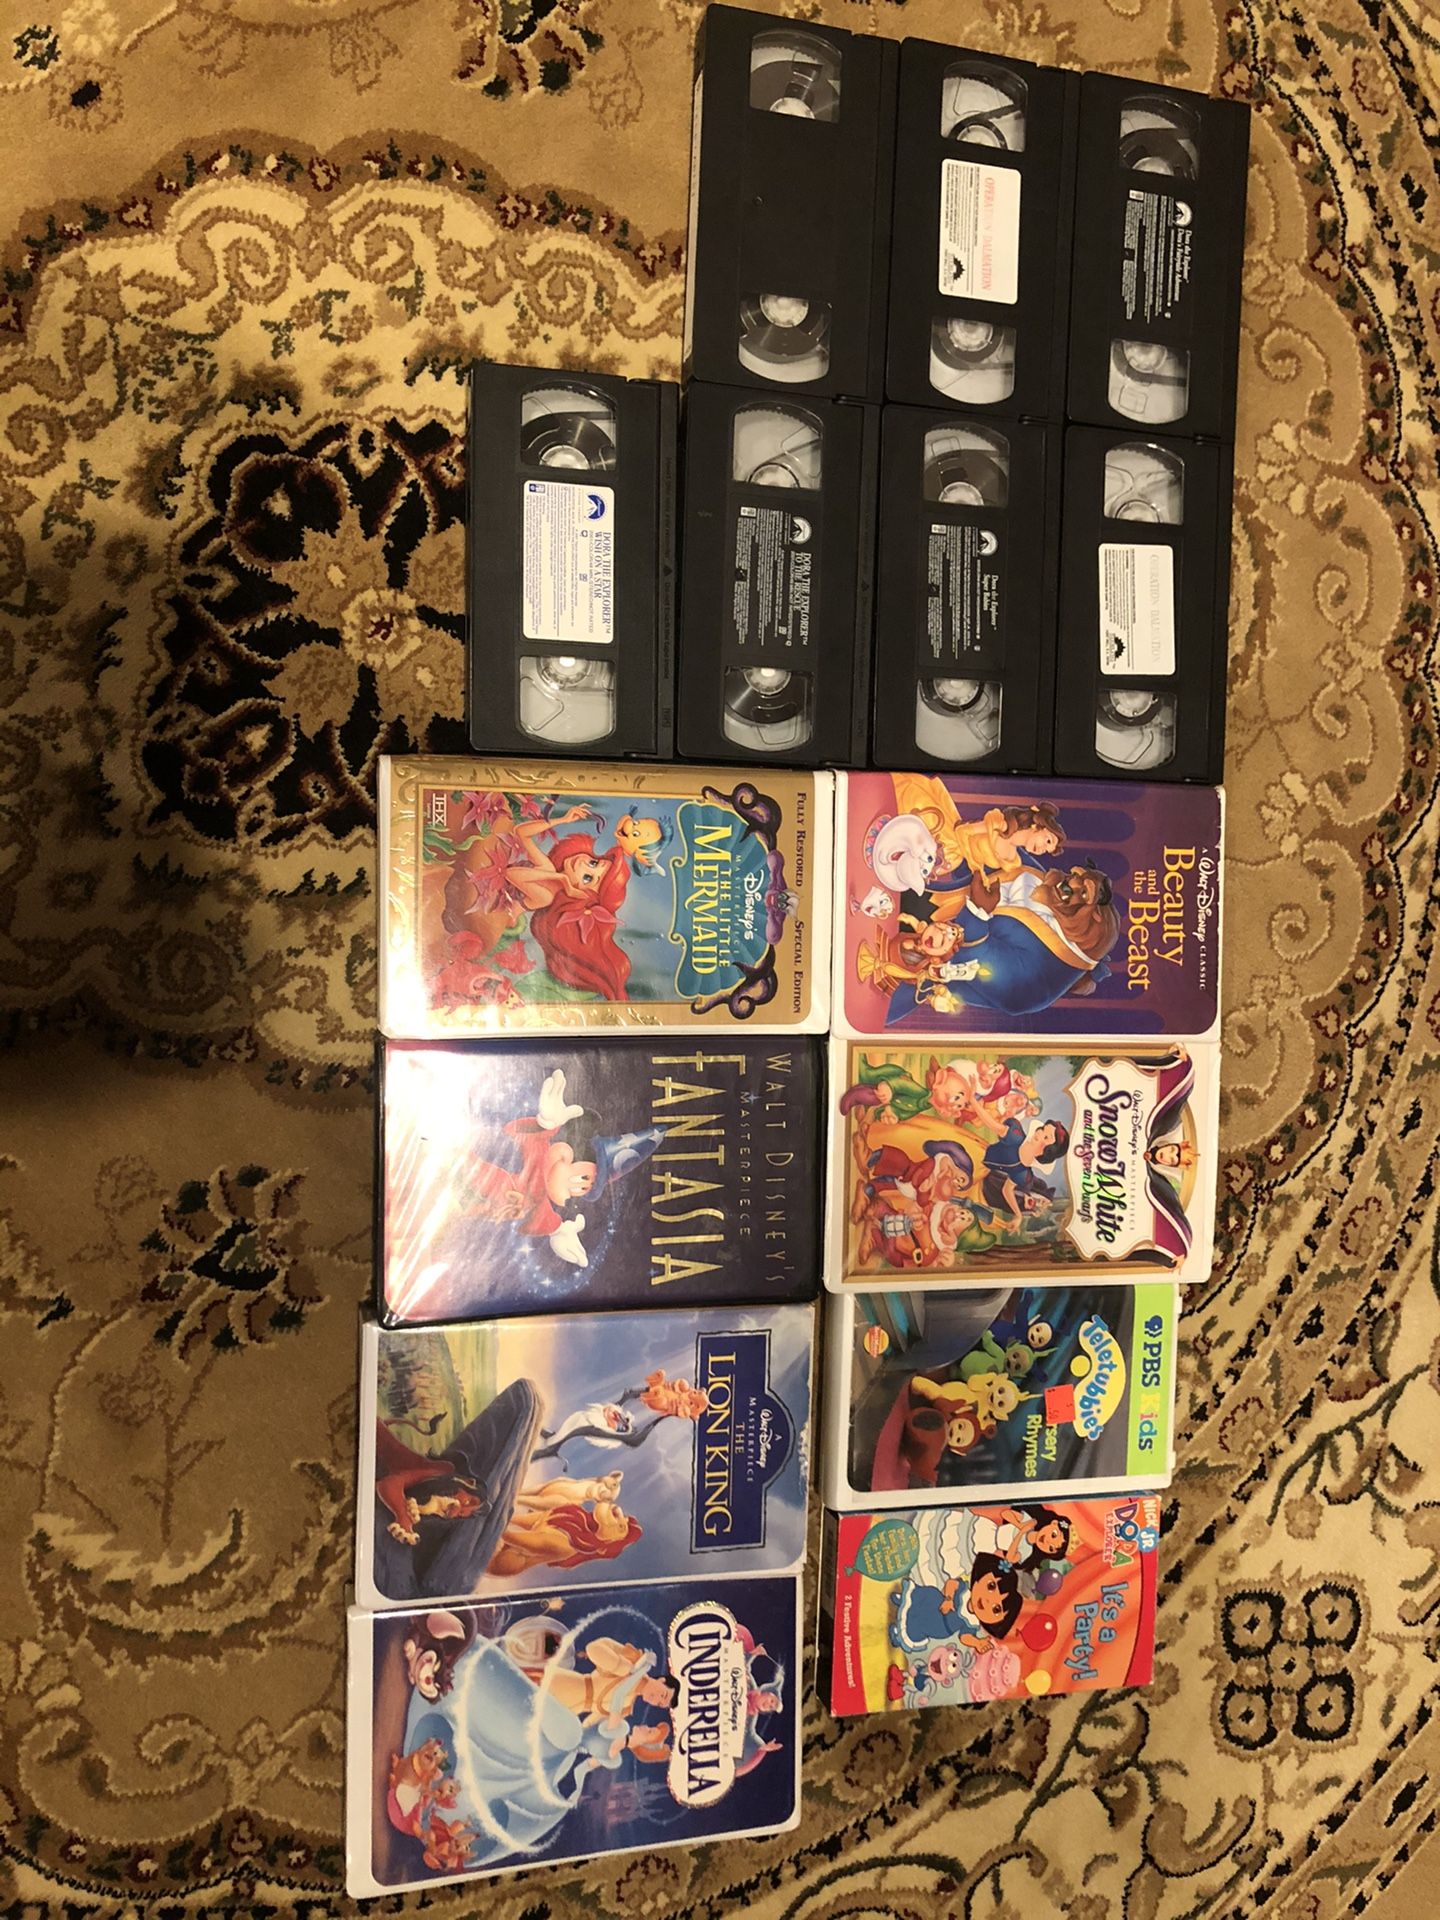 Free VCR tapes for Kids